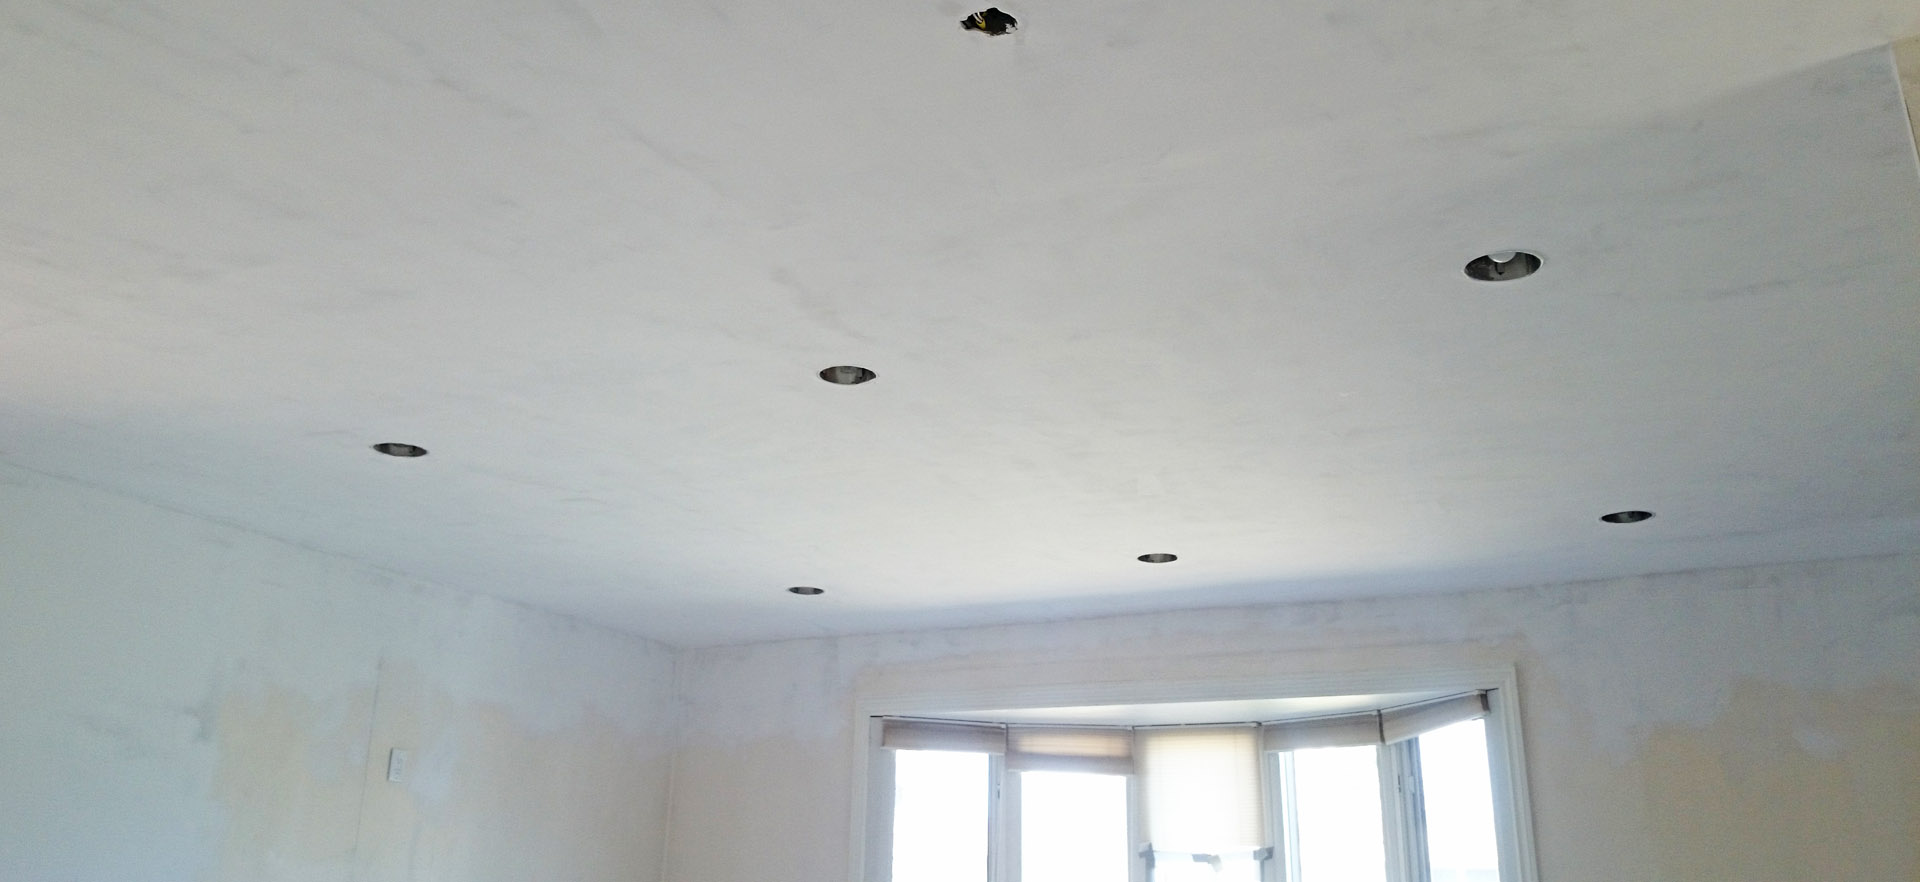 Drywal repair and restoration to this ceiling in Hamilton by Moncast